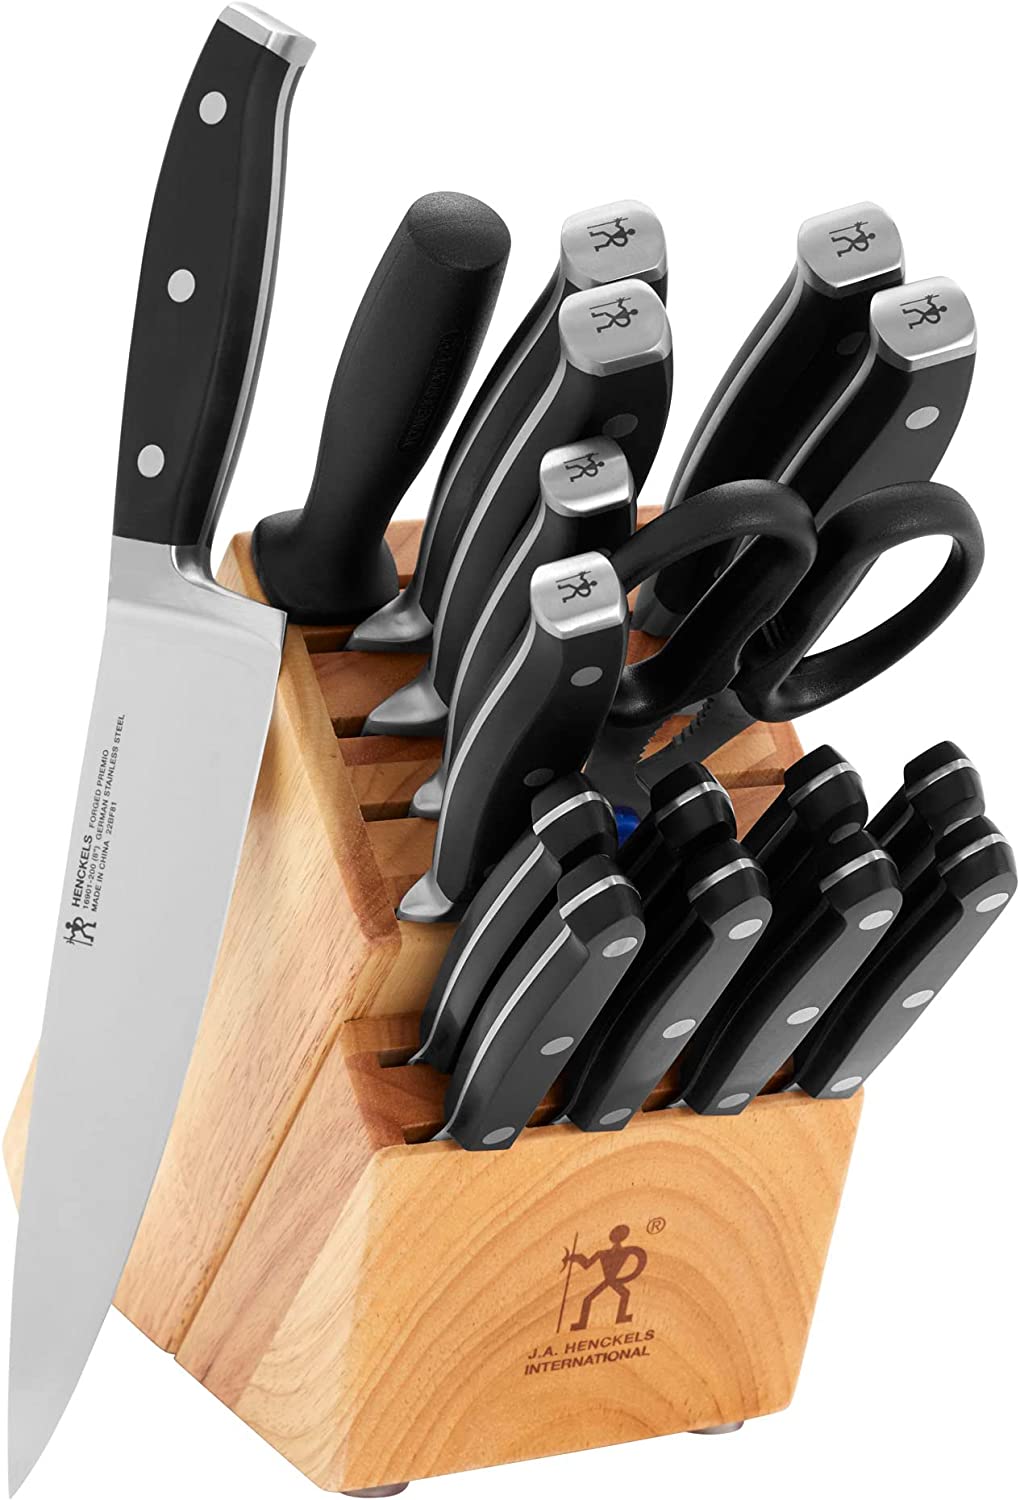 Wanbasion 6 Piece Orange Knife Set with Sheath，Stainless Steel Kitchen Knife  Set， Chef Knife Set for Meat Cutting 